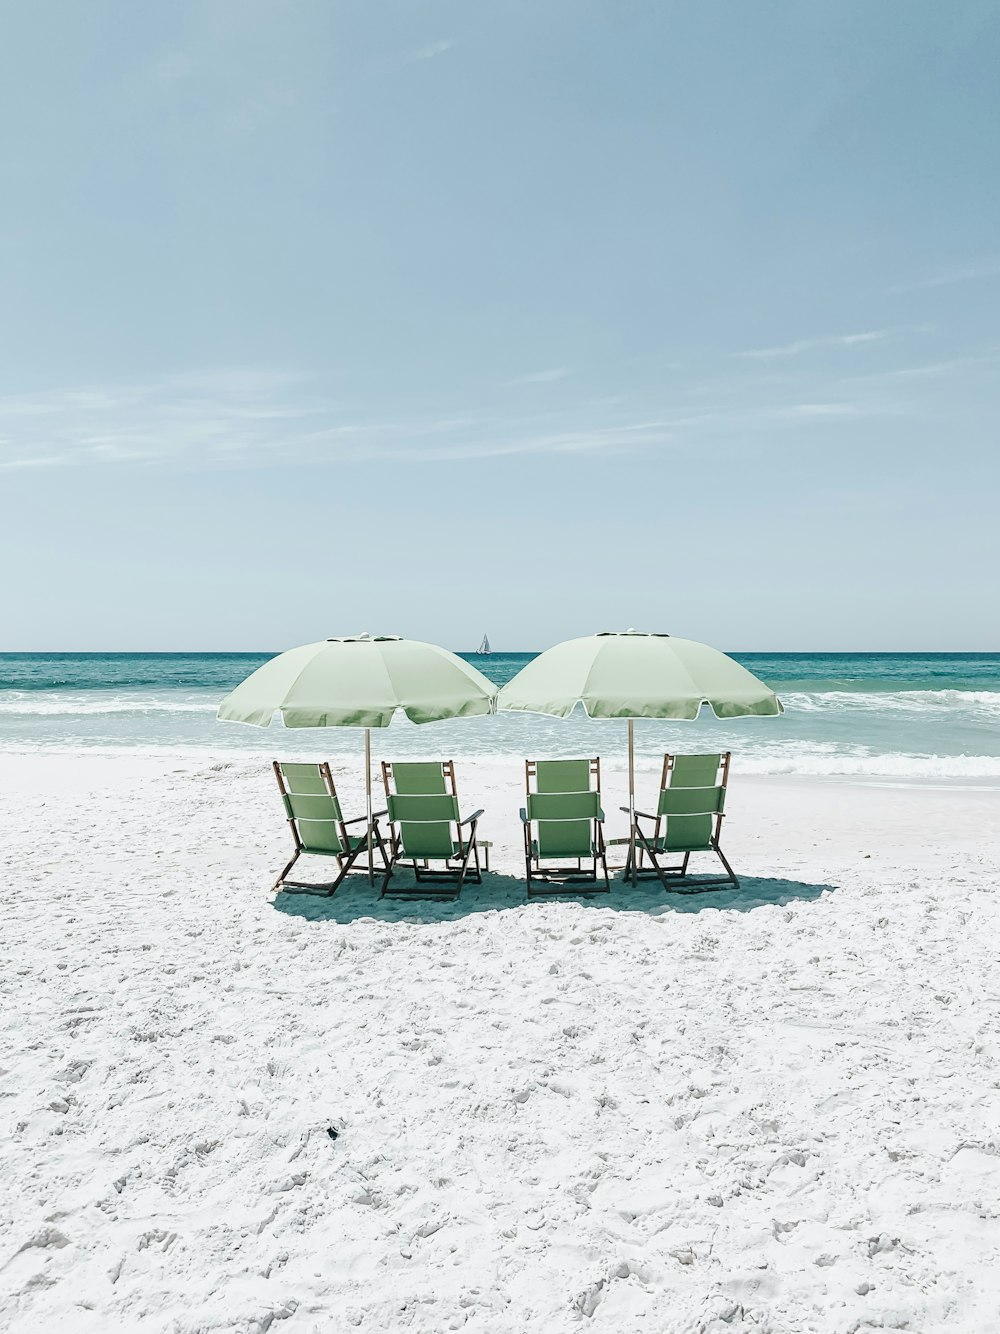 Seaside Beach Pictures Download Free Images On Unsplash